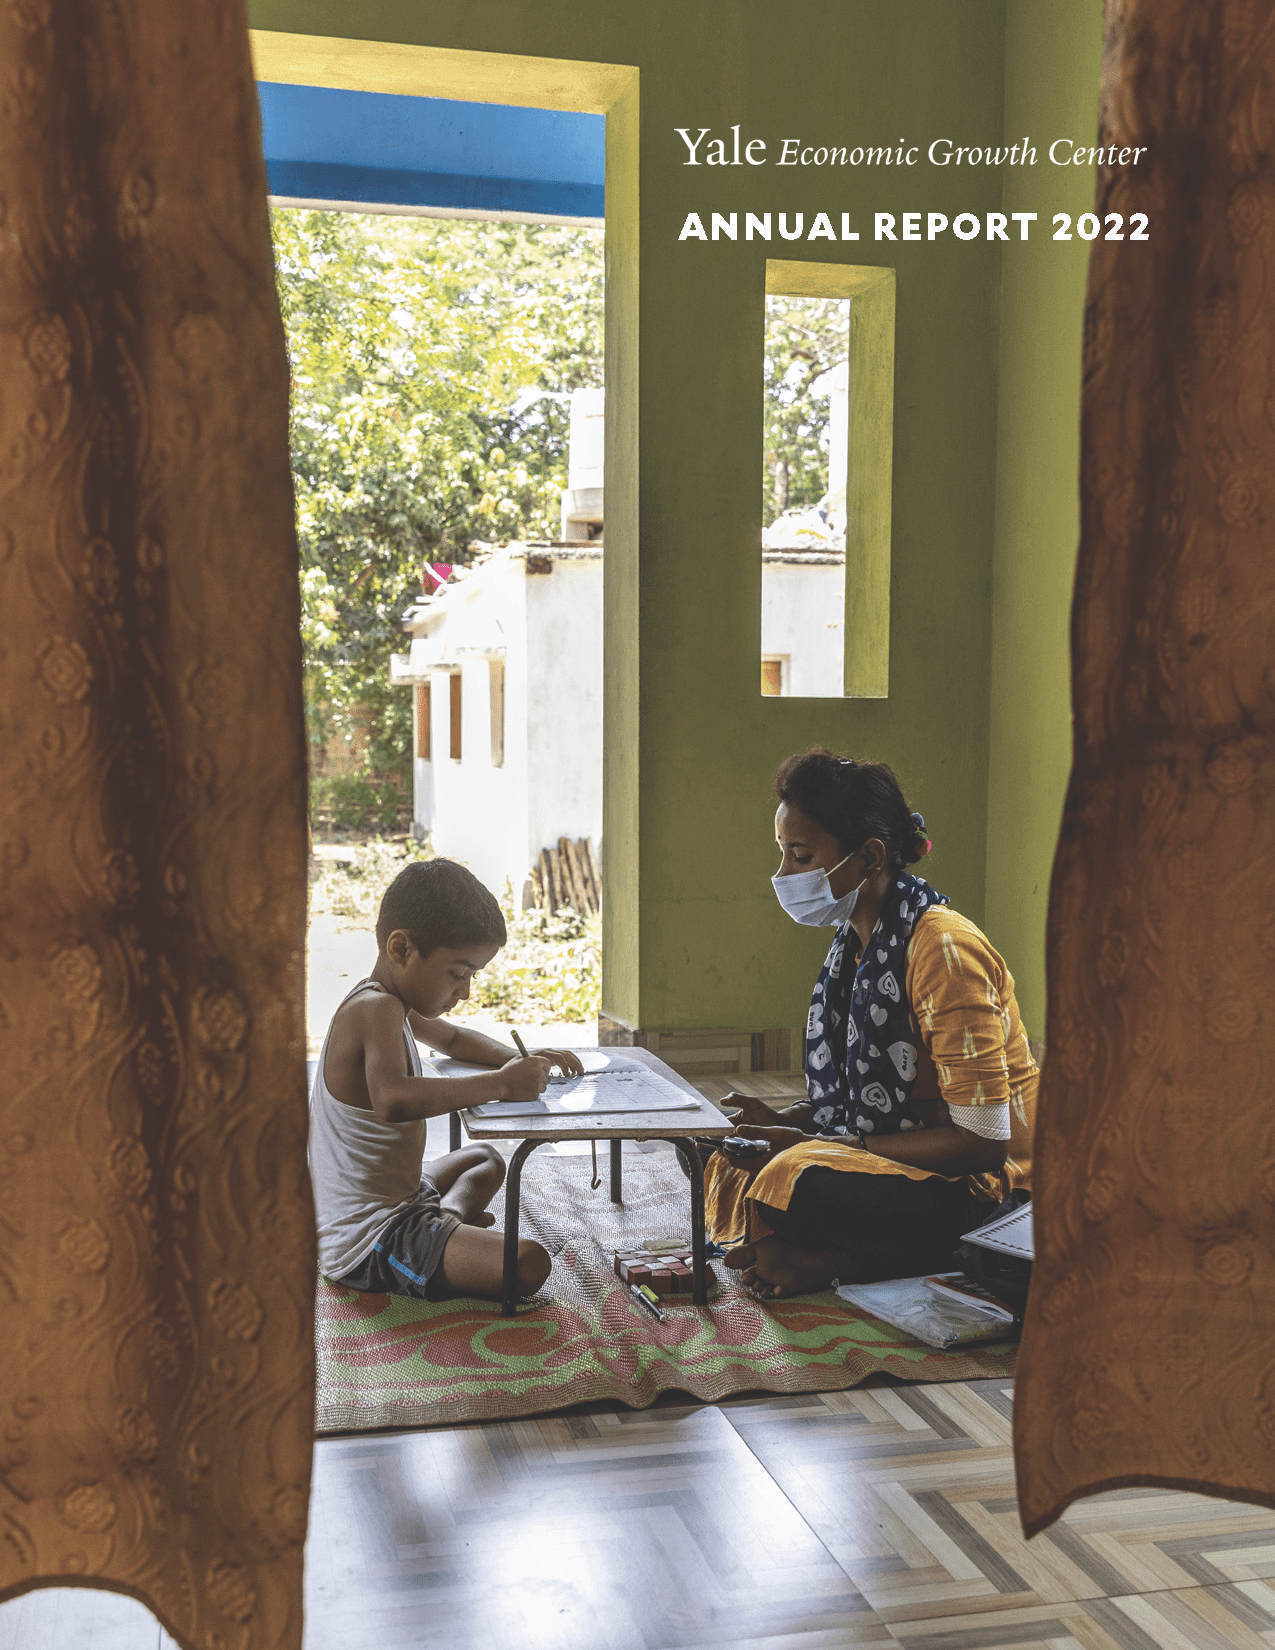 "The cover of the 2021-22 Annual Report features a teacher tutoring a young boy"